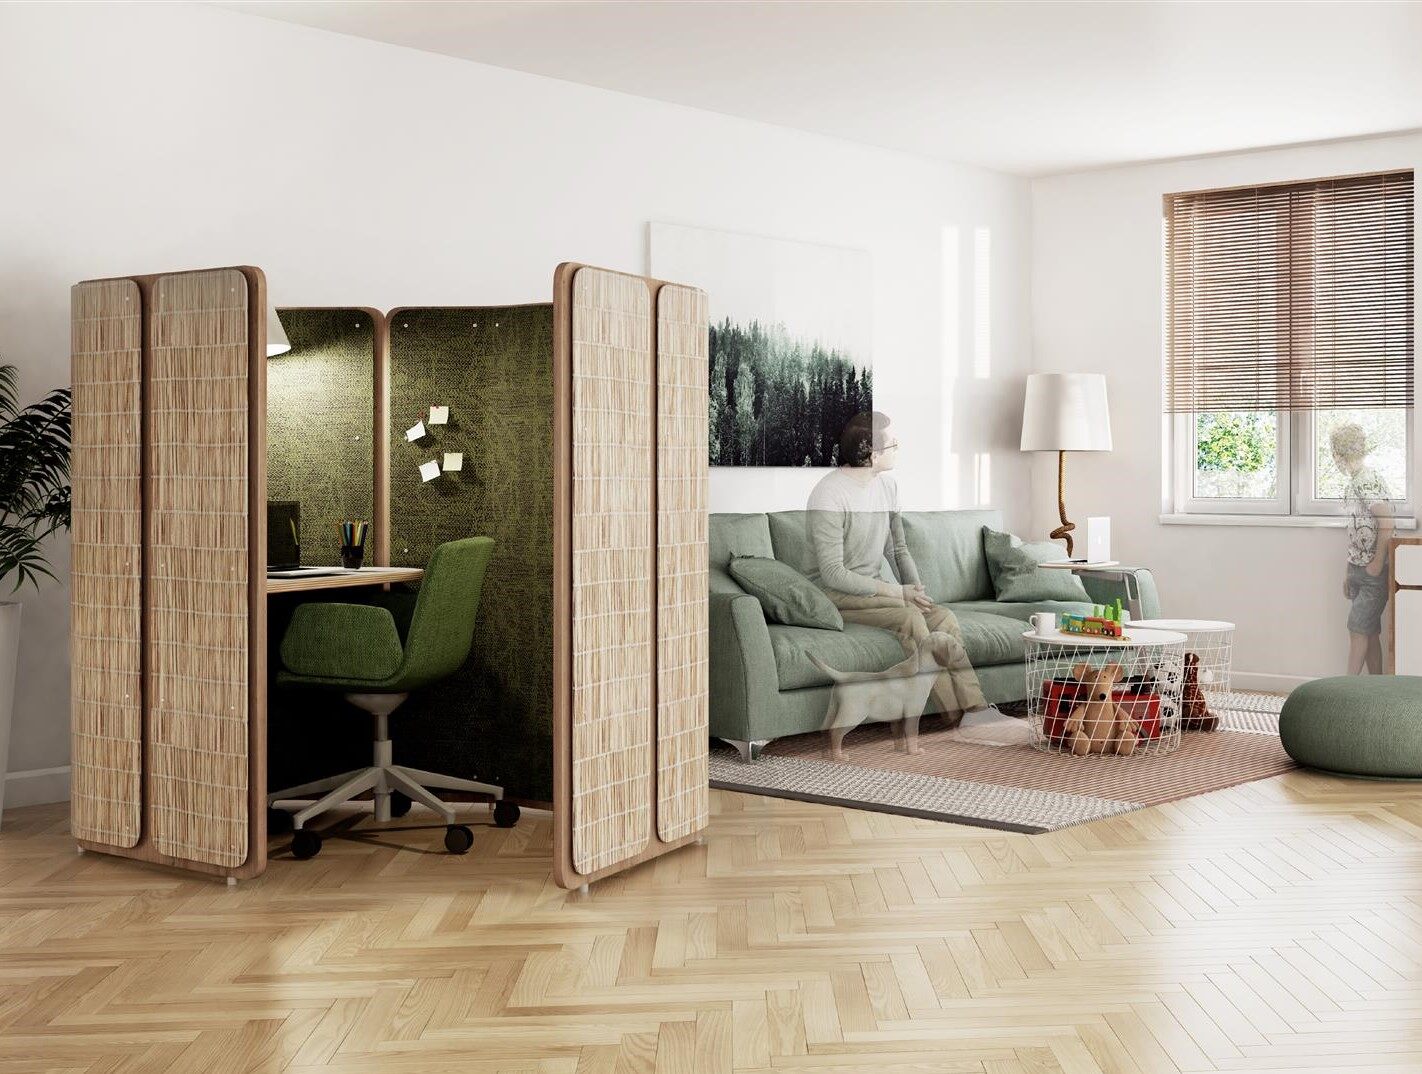 A stand-alone work pod that fits within a shared room in a home creates an enclosed private space.